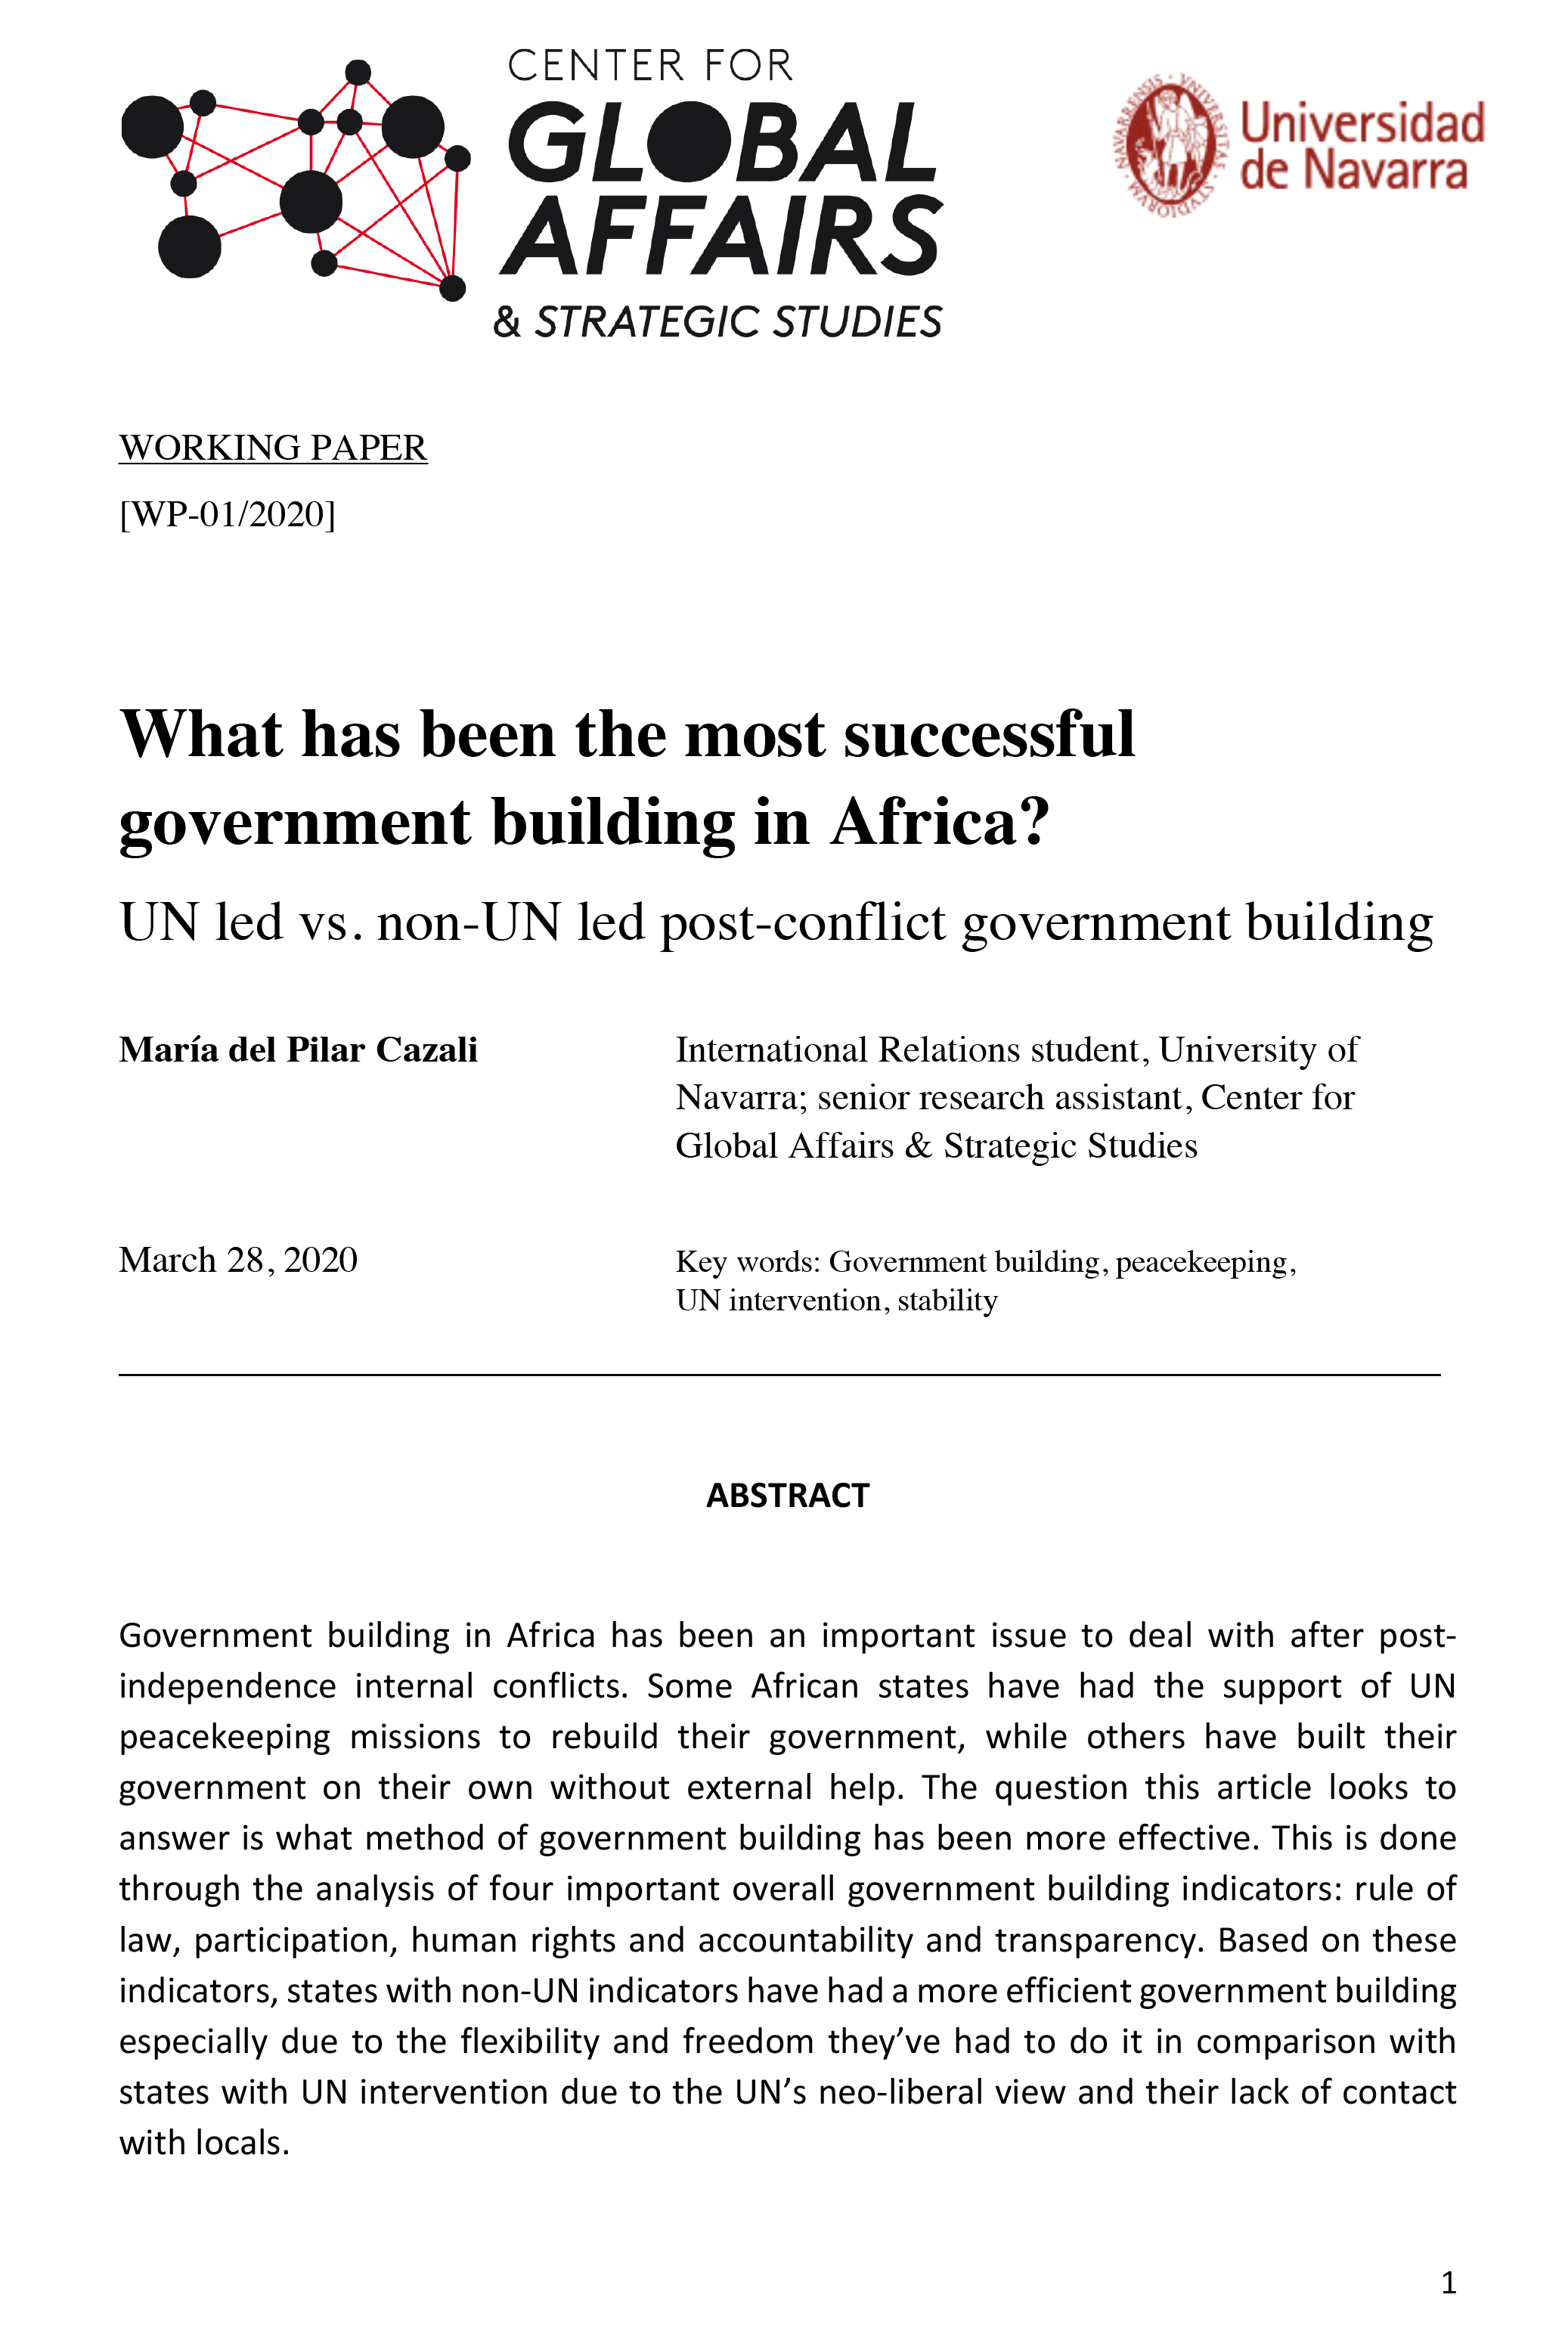 What has been the most successful government building in Africa?